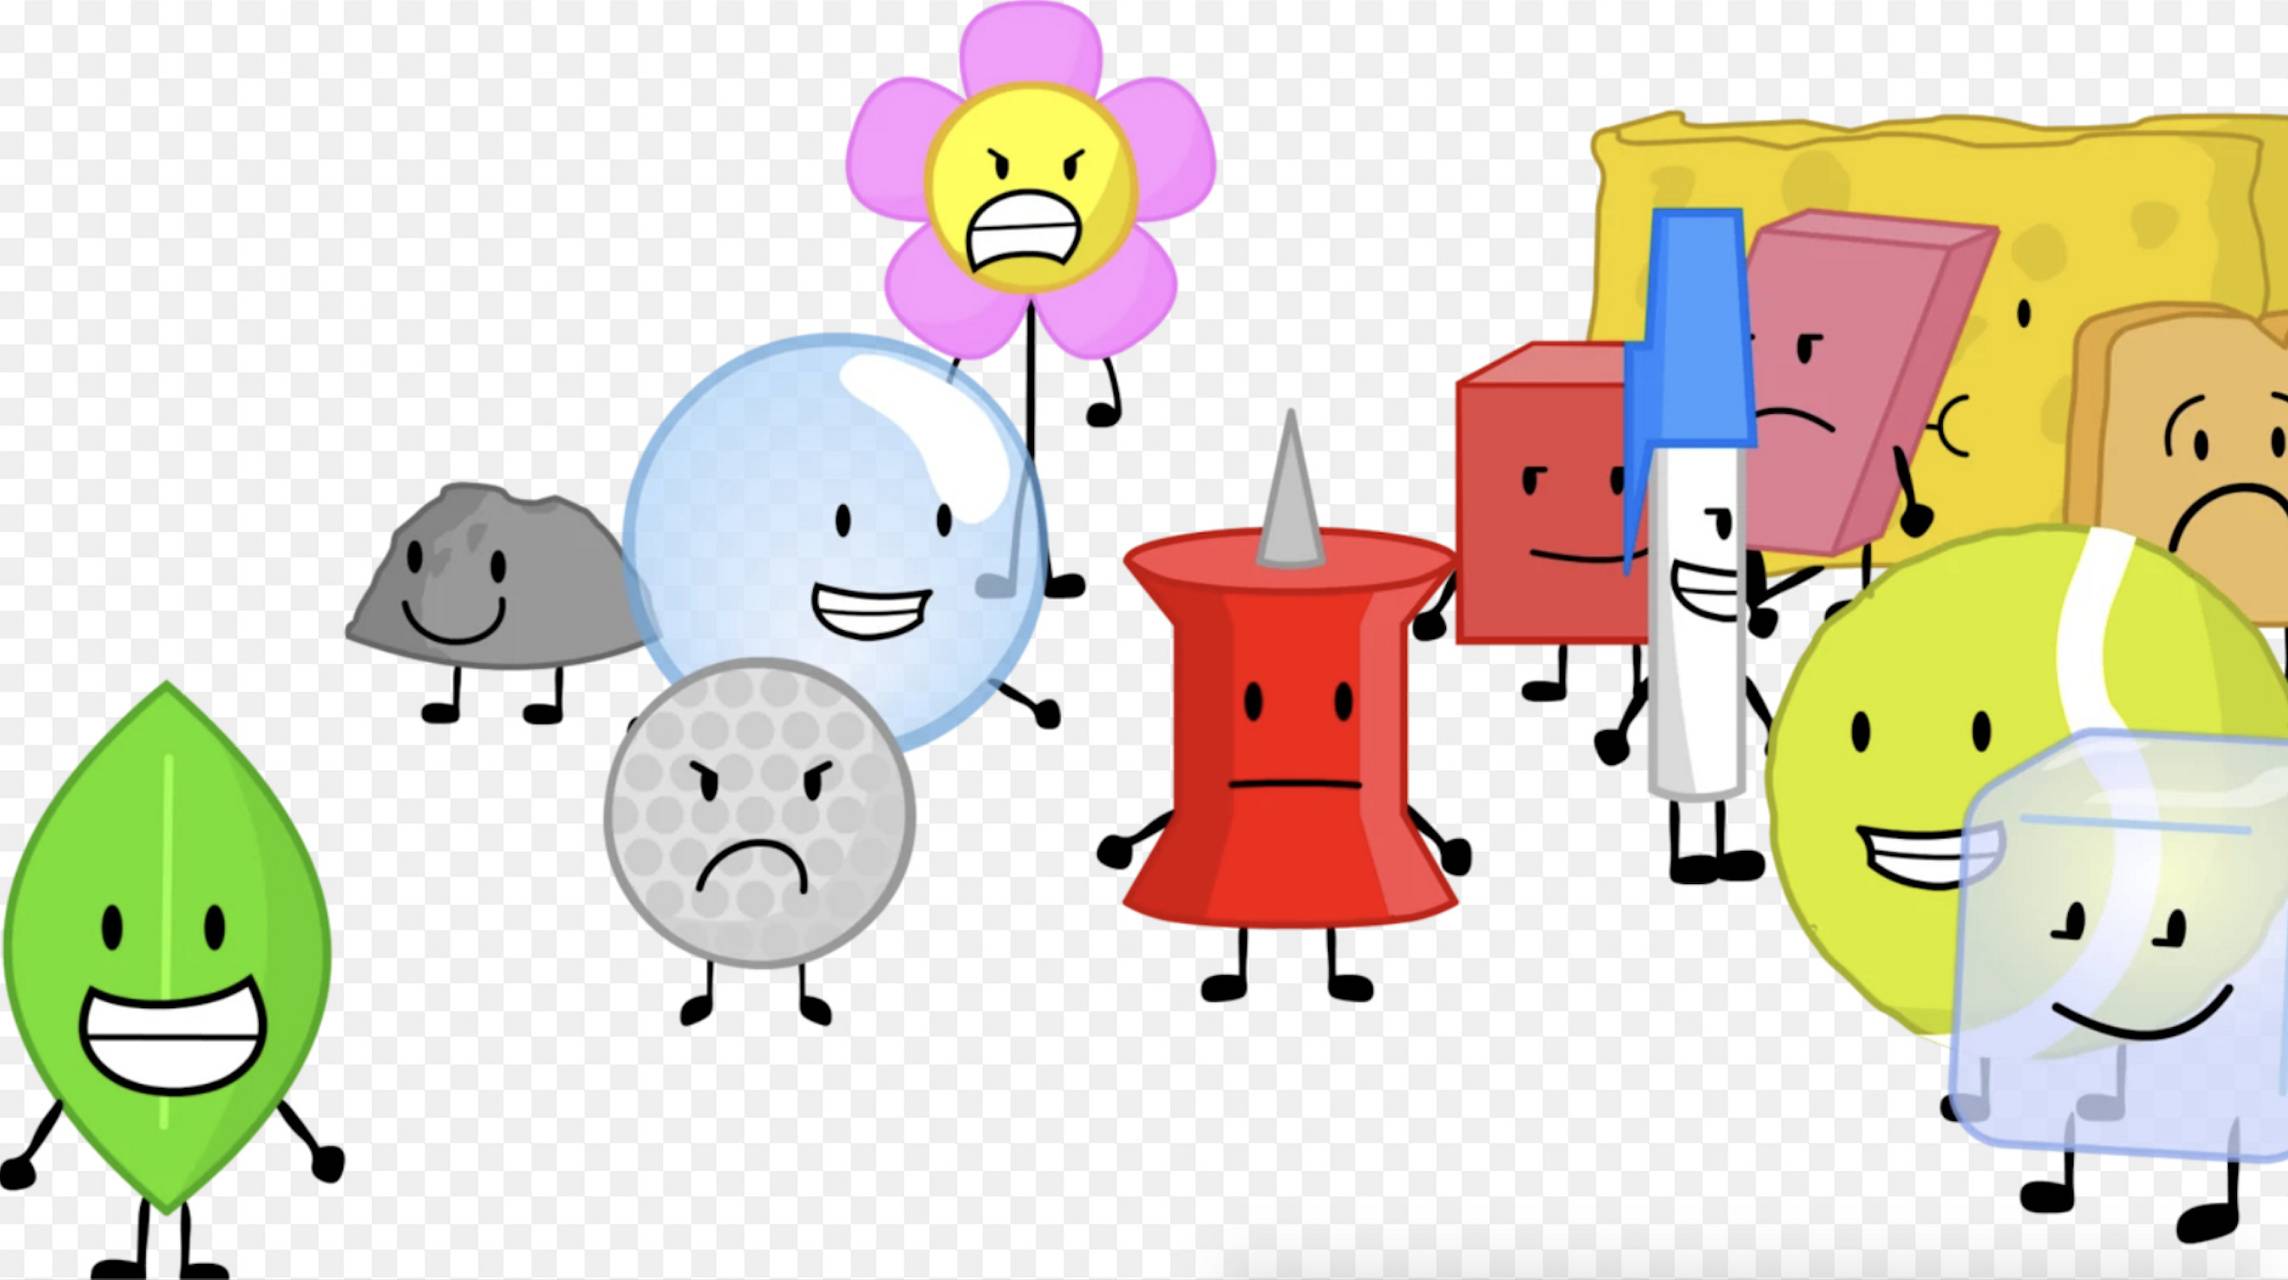 Bfdi wallpaper Pictures.